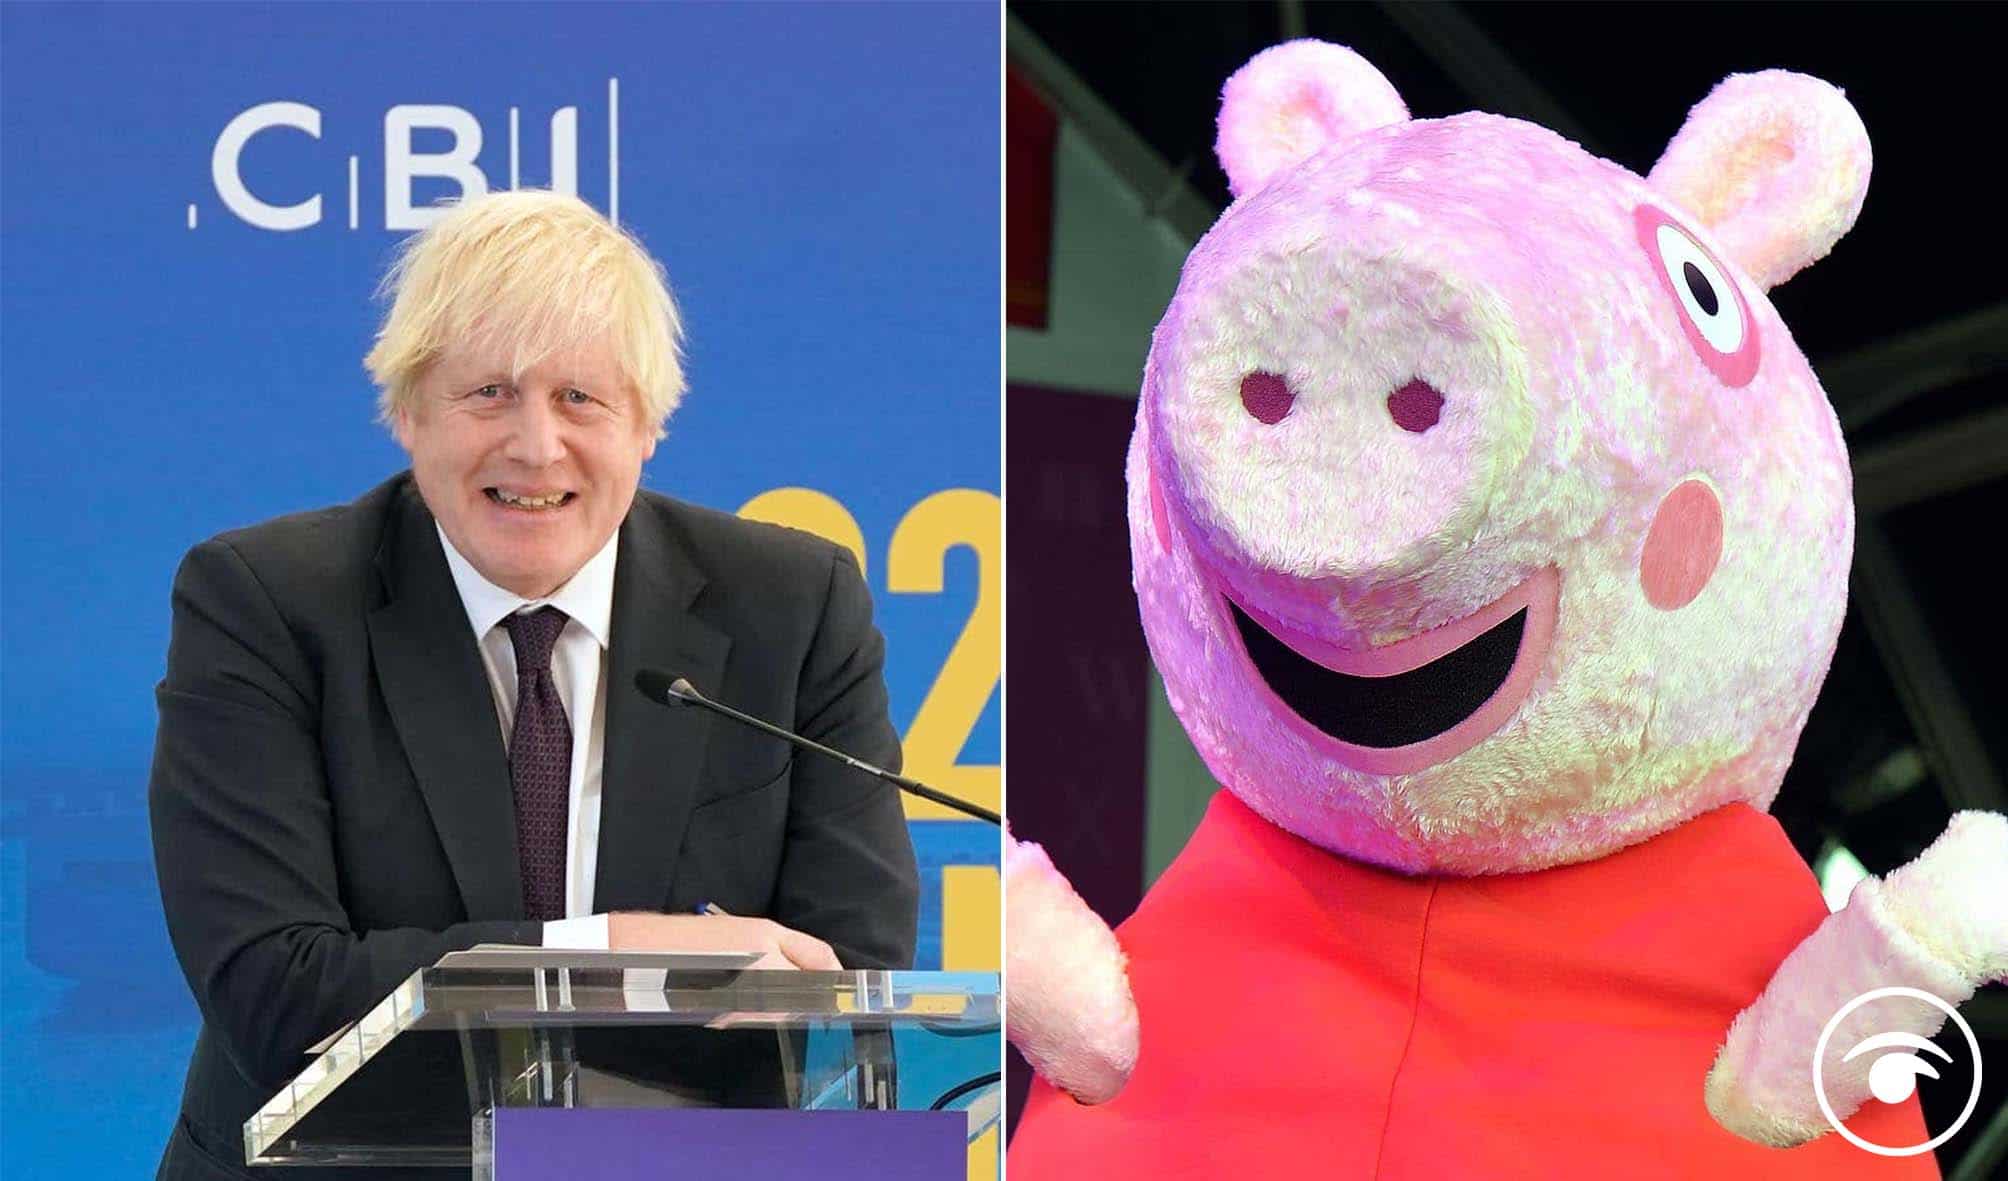 Reactions as PM tells business leaders: ‘Peppa Pig World my kind of place’